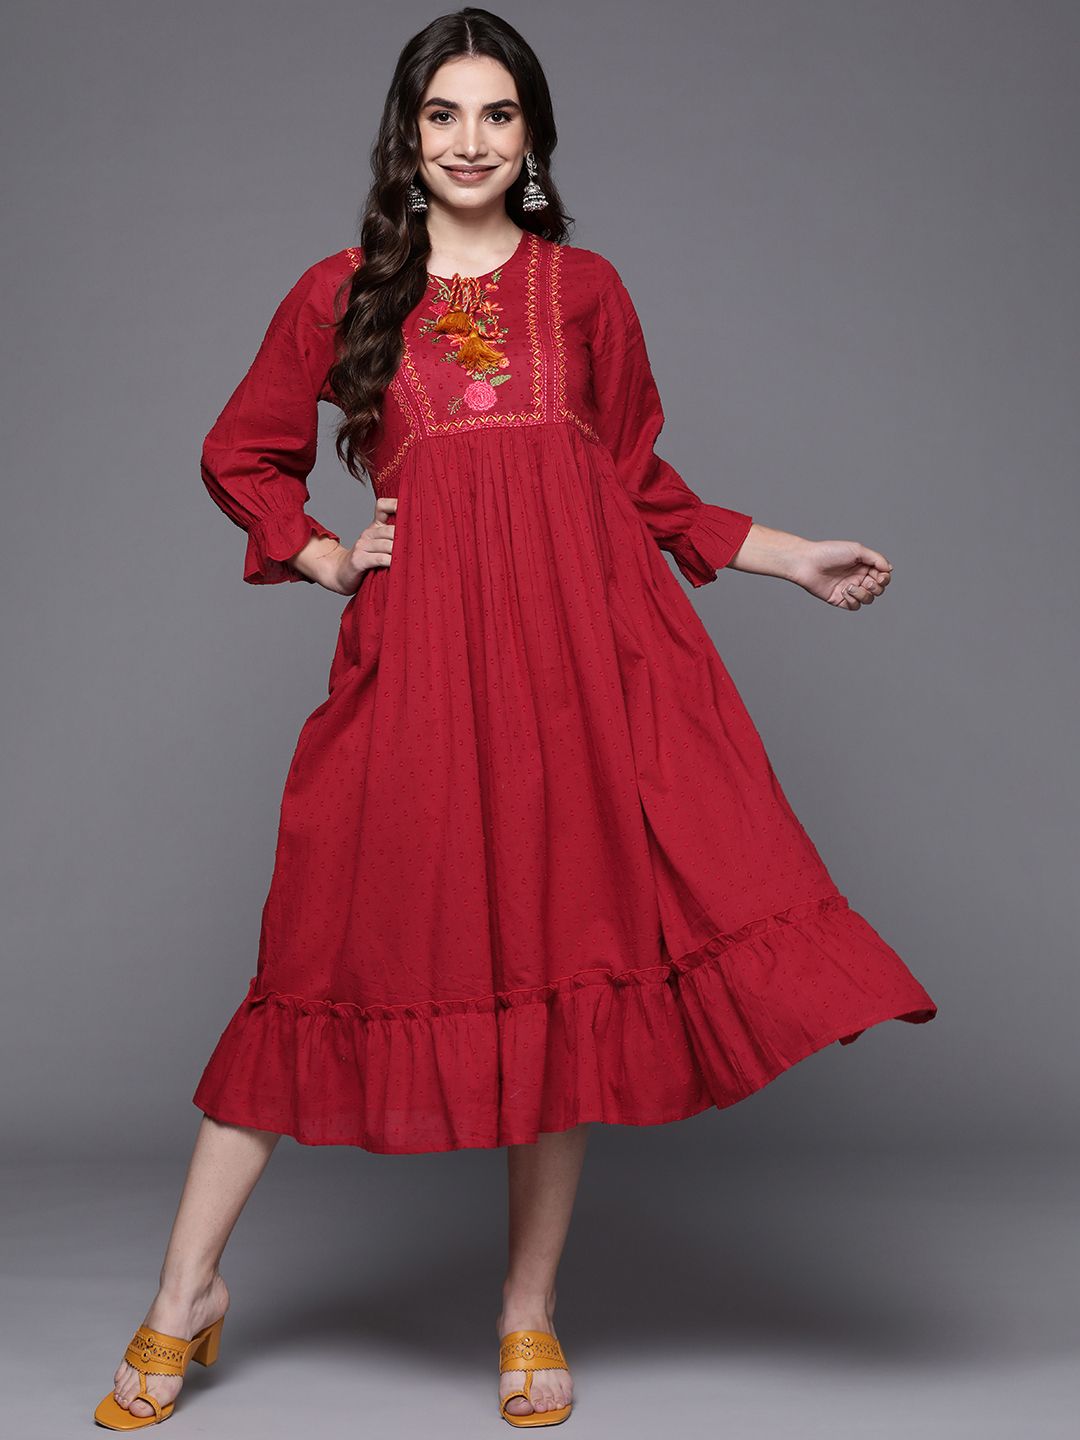 Indo Era Red Floral Embroidered Tie-Up Neck Ethnic A-Line Midi Dress Price in India